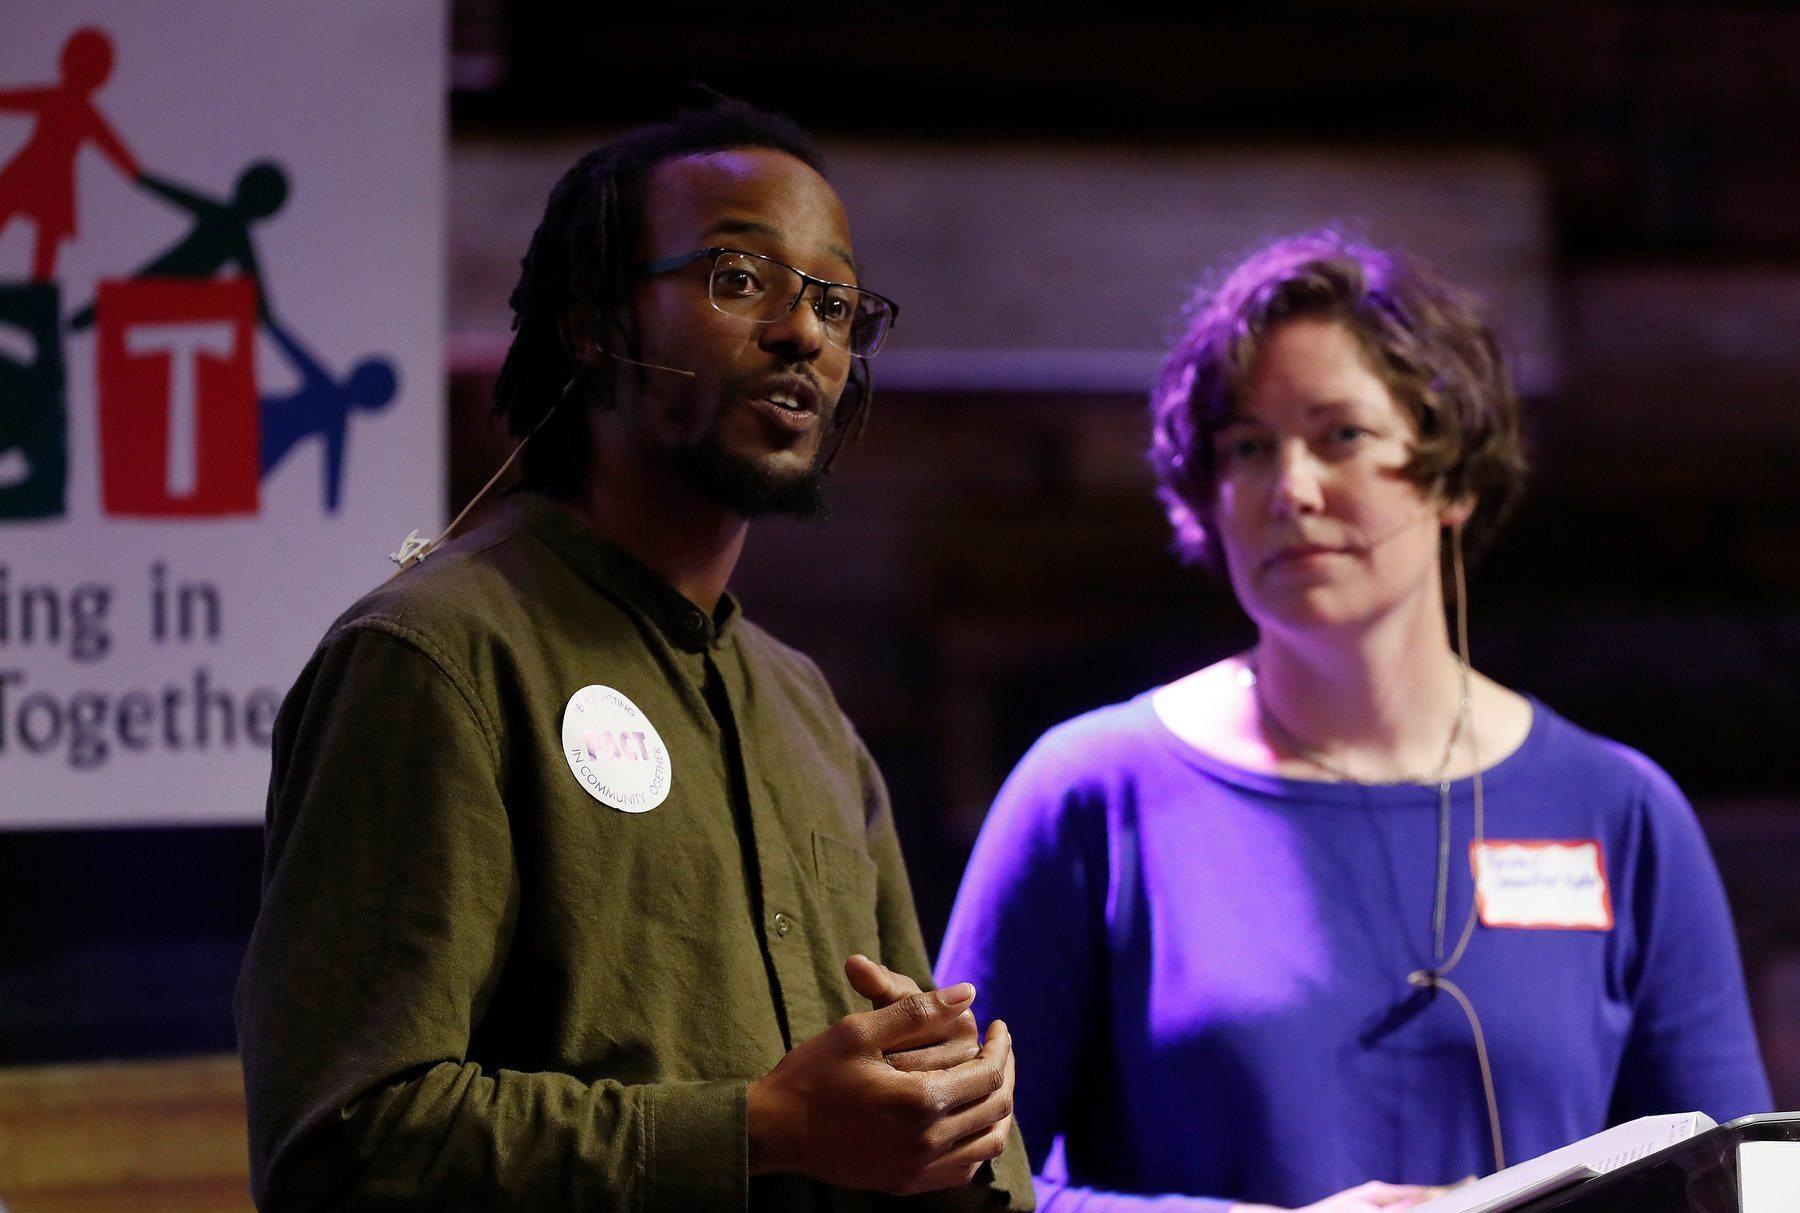 A Black, male community organizer wearing a green shirt speaks next to a white woman wearing a purple shirt at a meeting of People Acting in Community Together in San Jose, California.